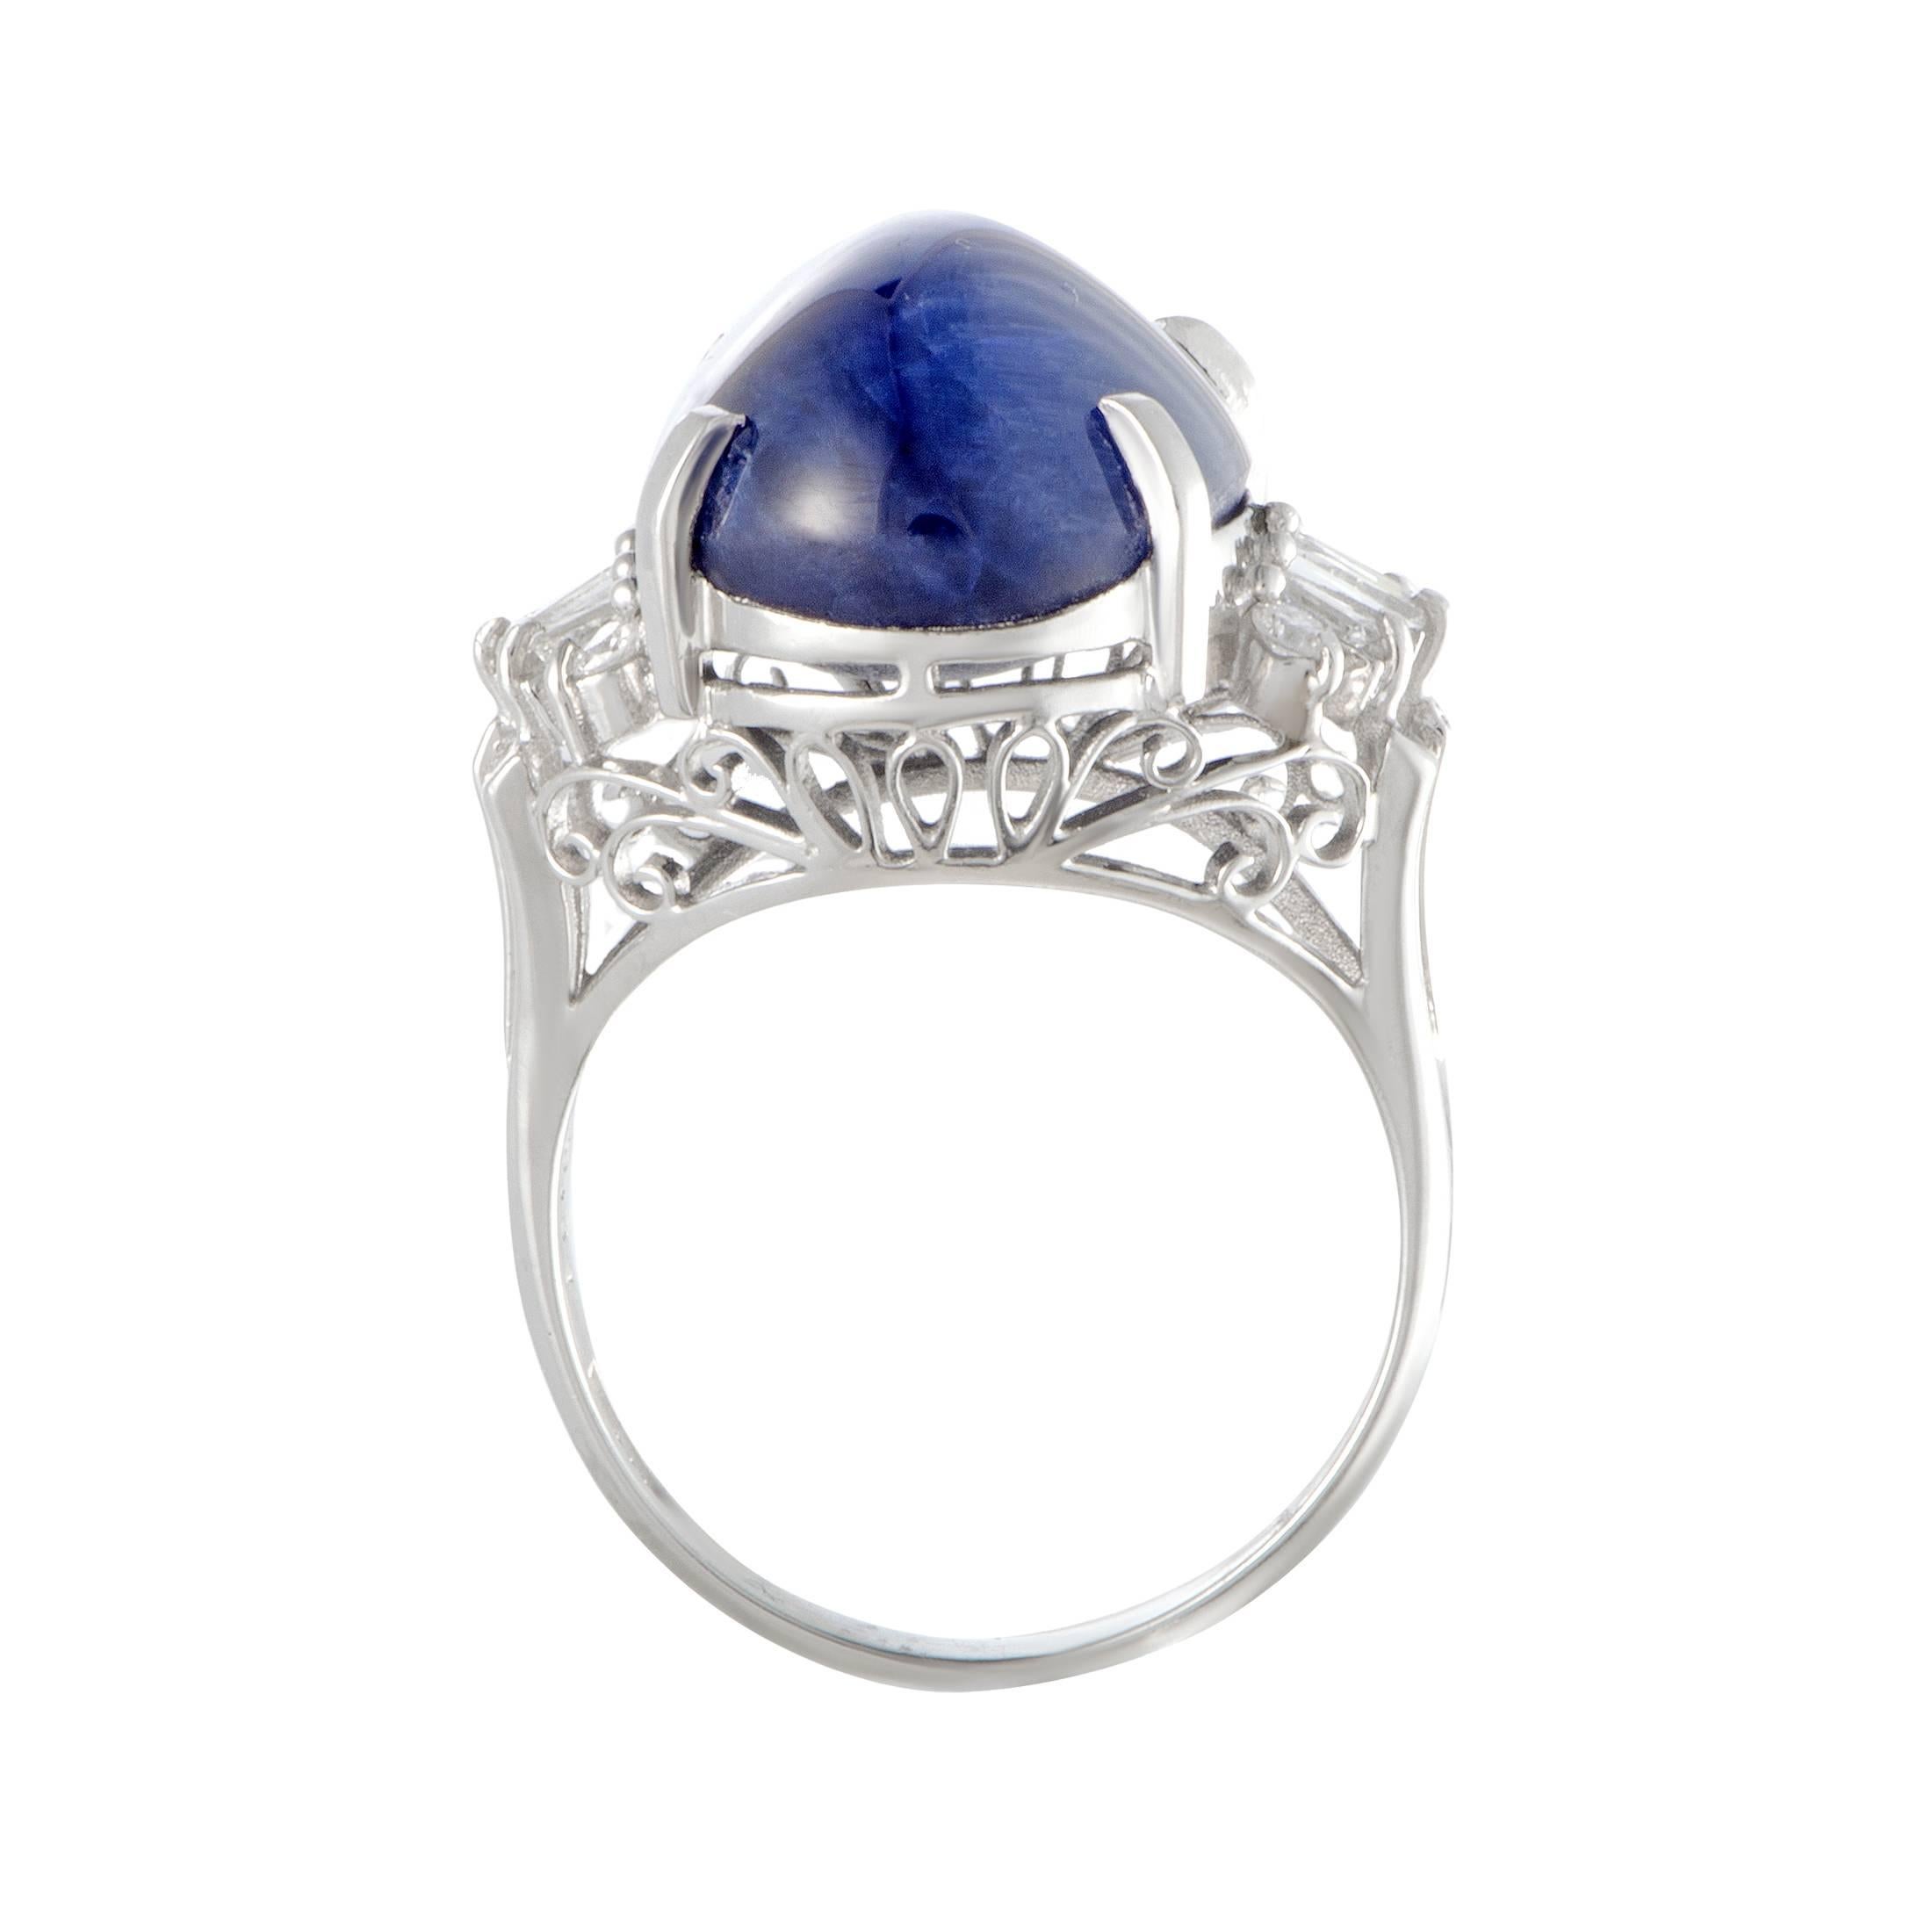 Set against the opulent backdrop of prestigiously gleaming platinum and luxuriously scintillating diamonds, the sapphire in this ring compels with its regal color and marvelous cut. The sapphire weighs 18.50 carats, and it is accompanied by 0.34